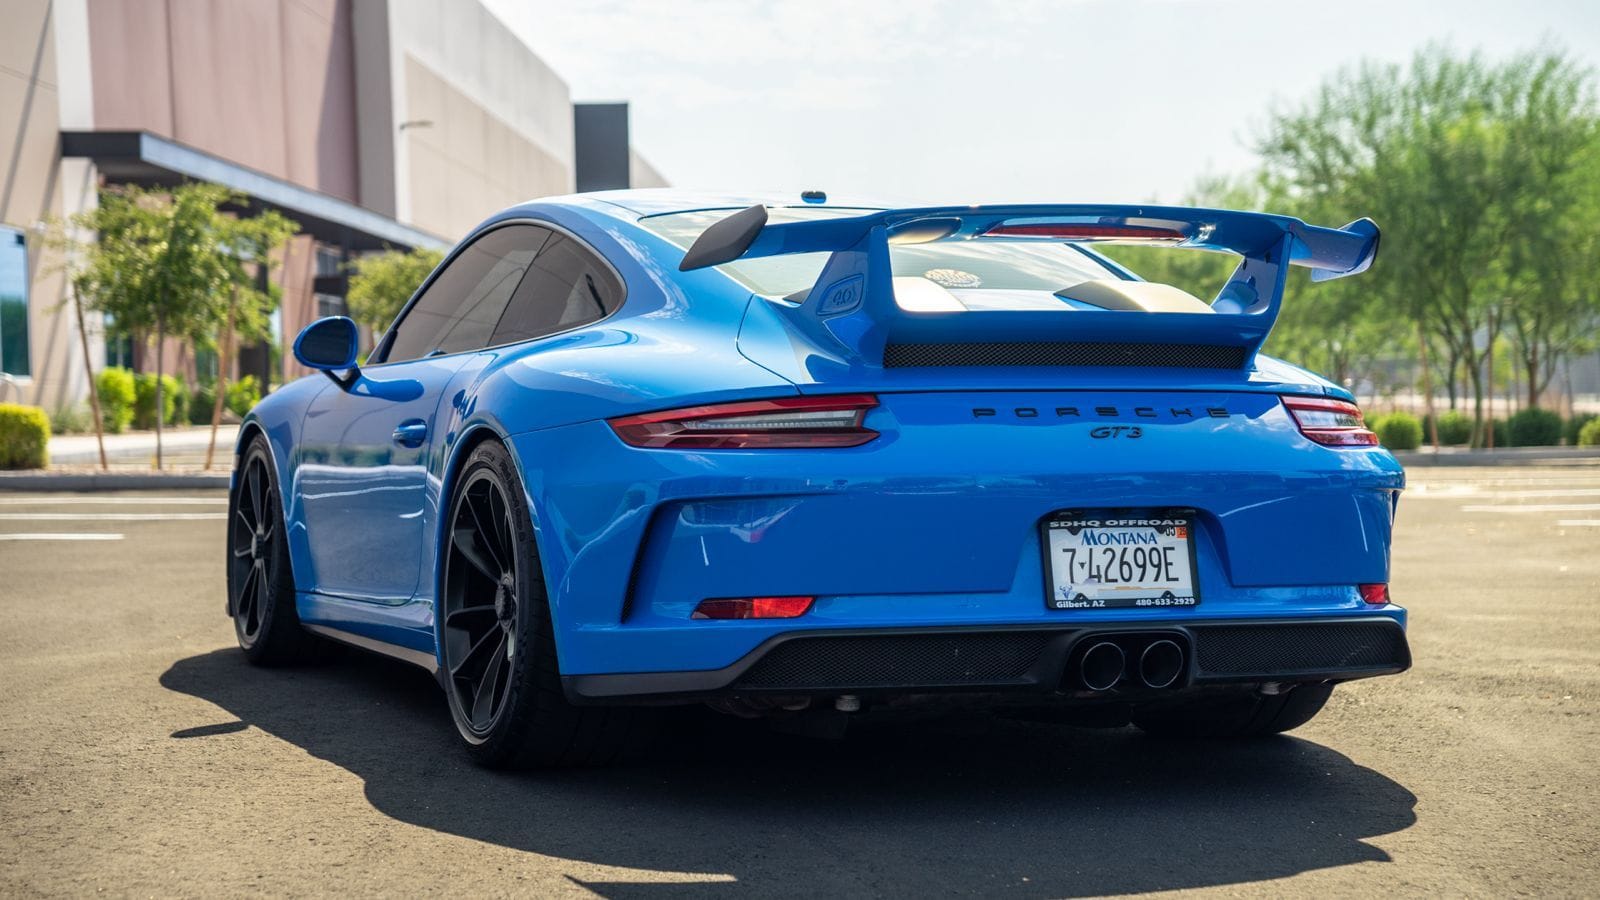 2018 Porsche GT3 - 991.2 Voodoo Blue GT3 - Used - VIN WP0AC2A94JS175121 - 17,316 Miles - 6 cyl - 2WD - Manual - Coupe - Blue - Gilbert, AZ 85233, United States